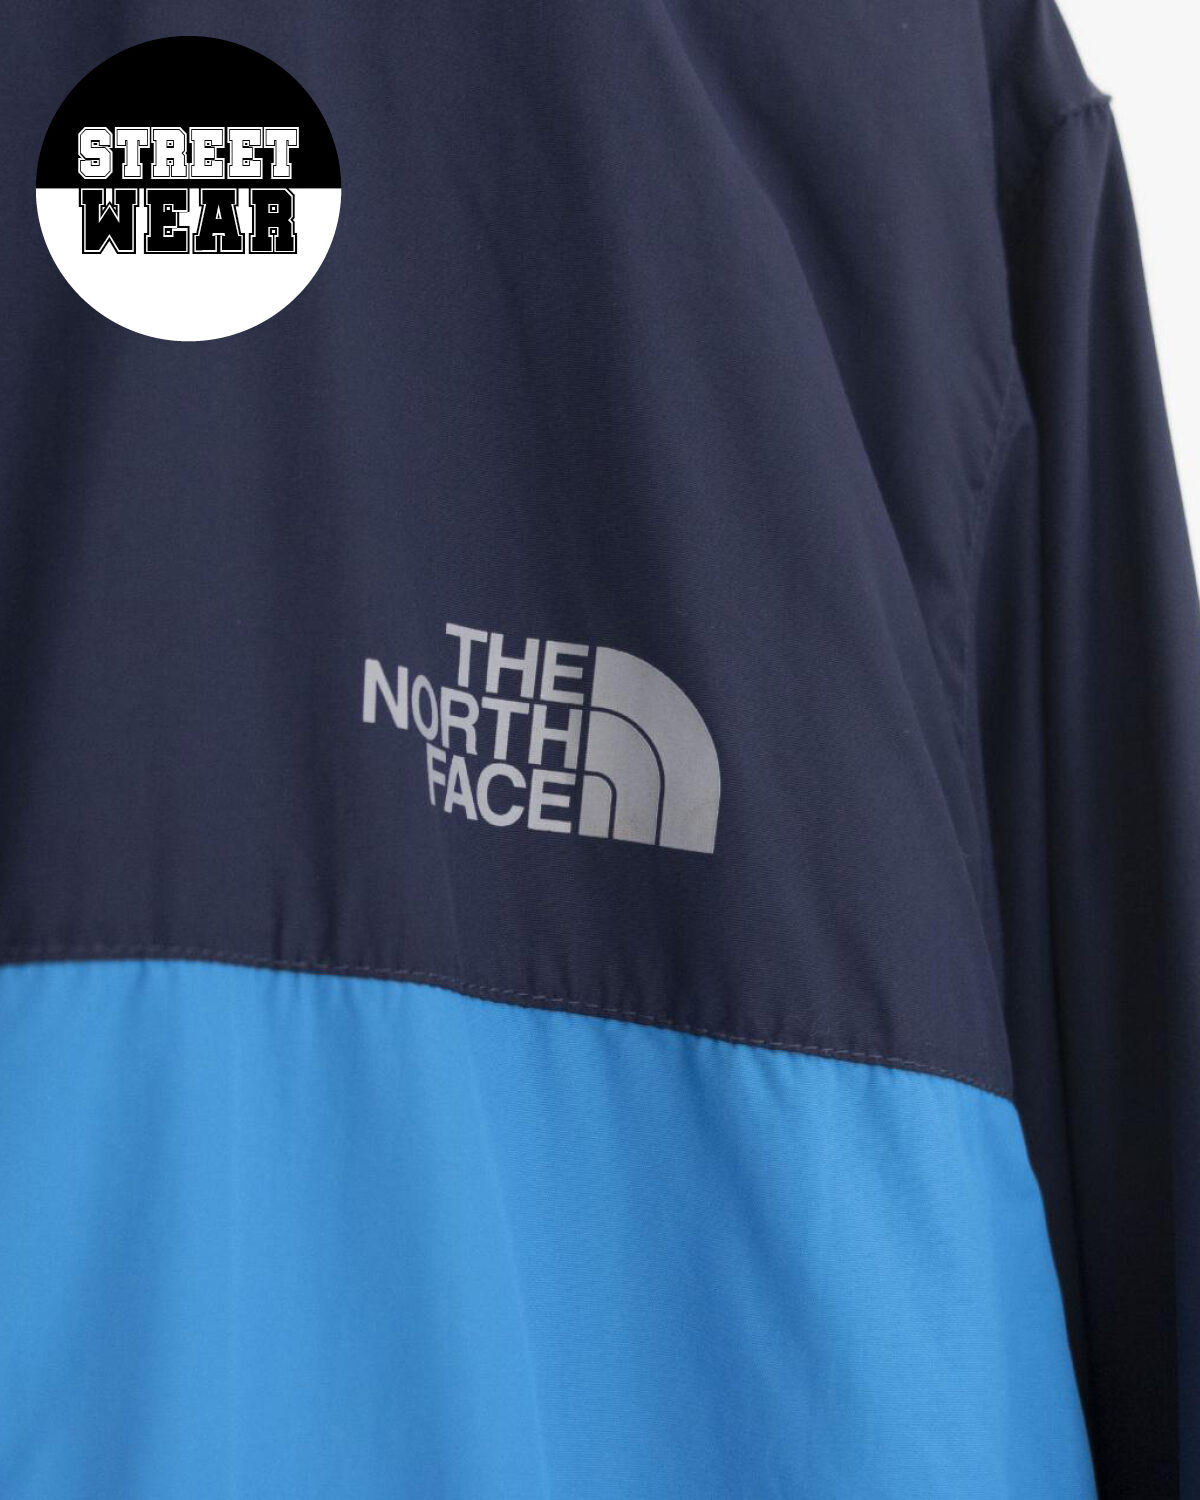 The North Face - Lightweight jacket